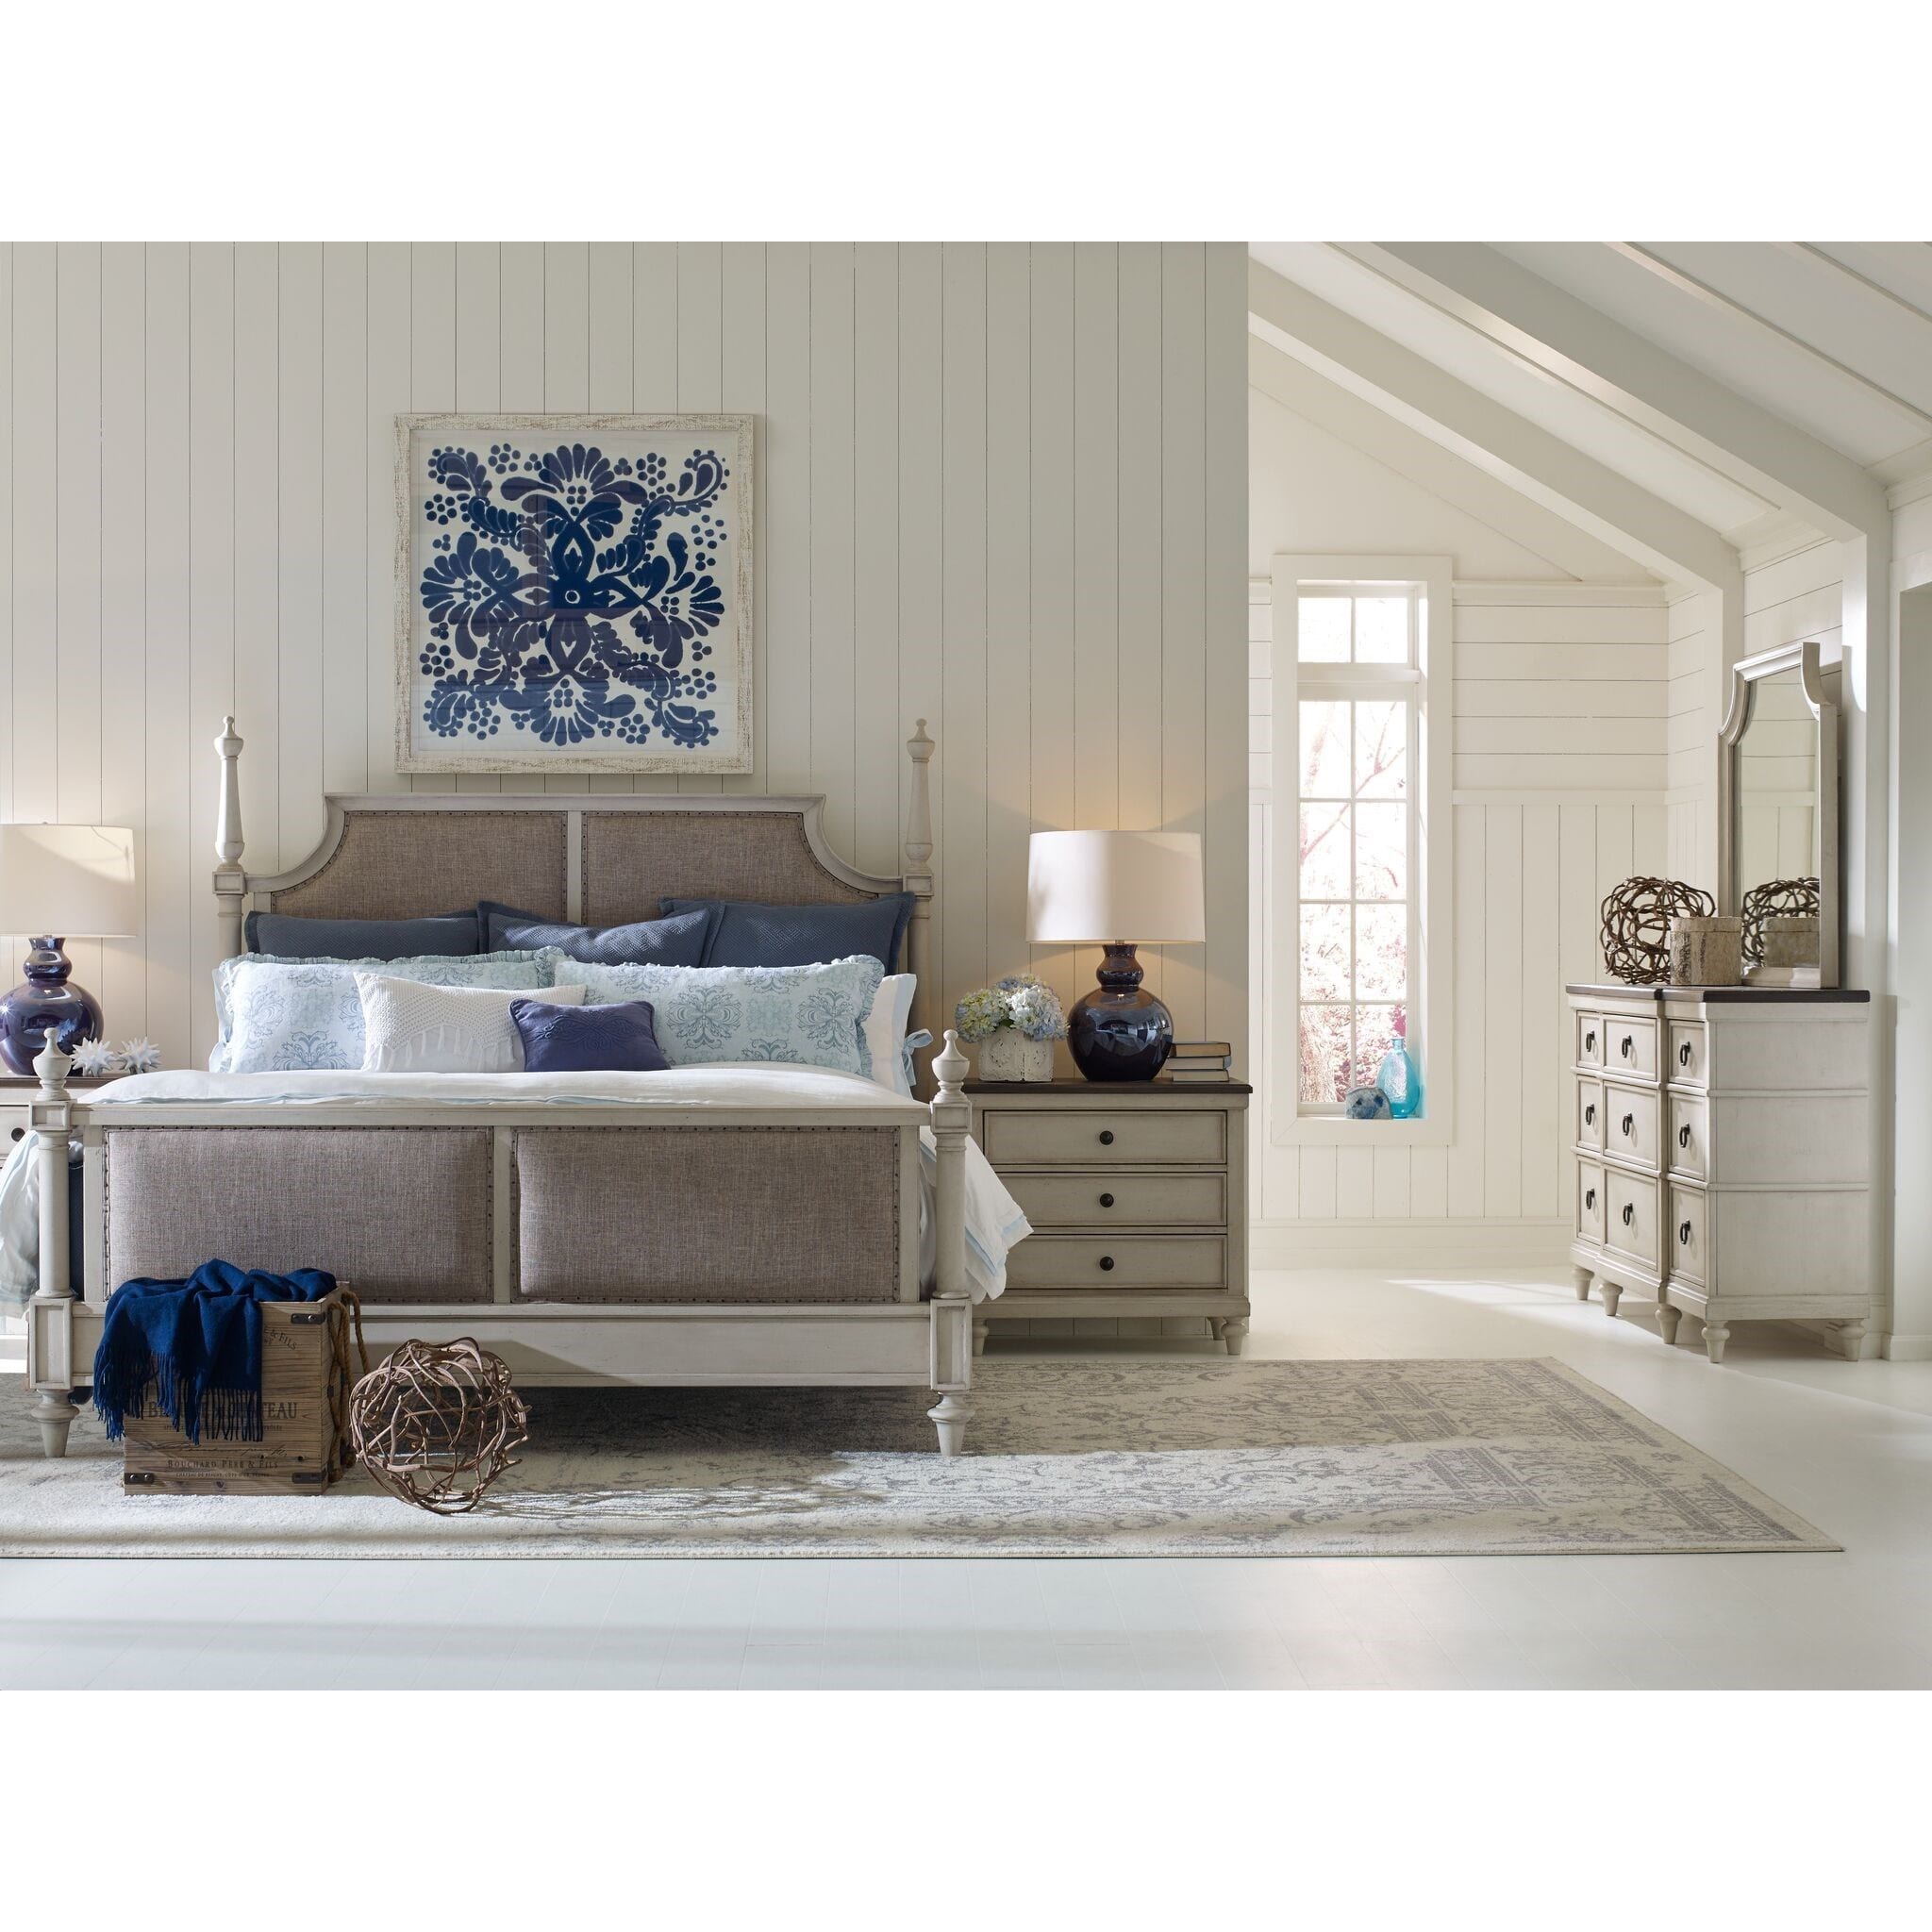 products legacy classic color brookhaven 892579080 6400 ck bedroom group 1 b1 - Brookhaven Bedroom